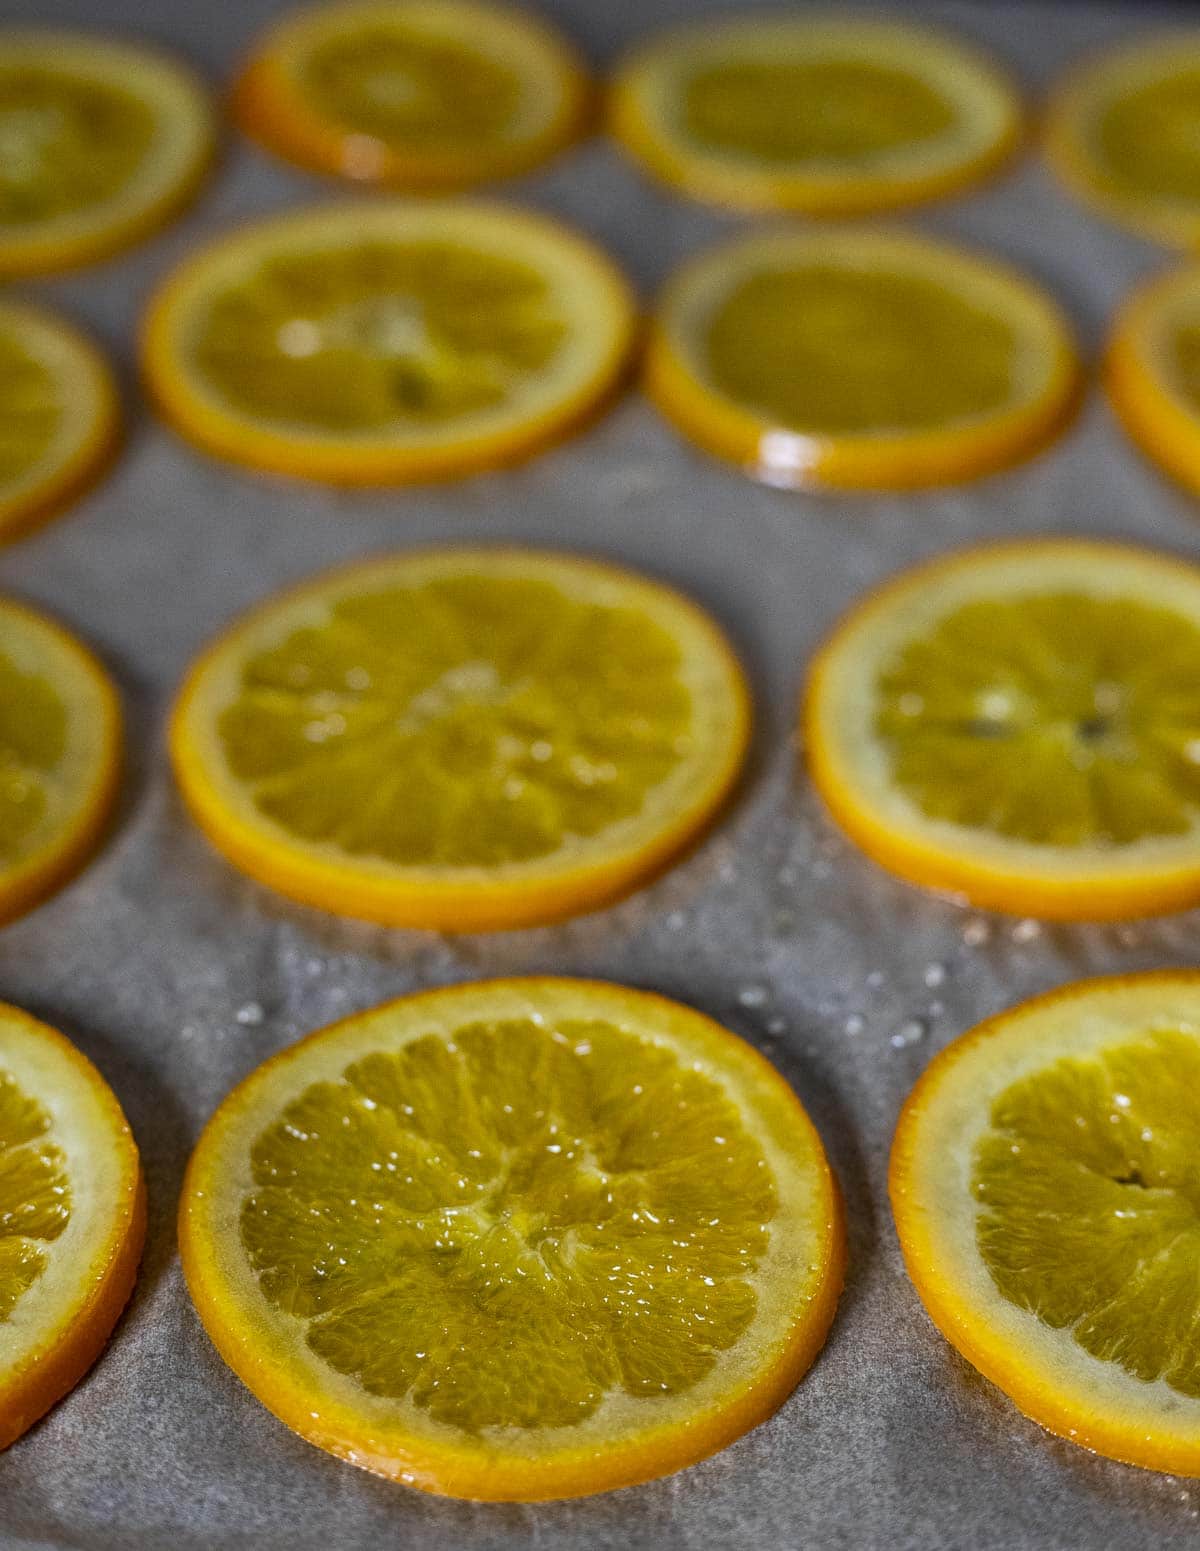 Orange slices drying on a sheet of parchment paper.